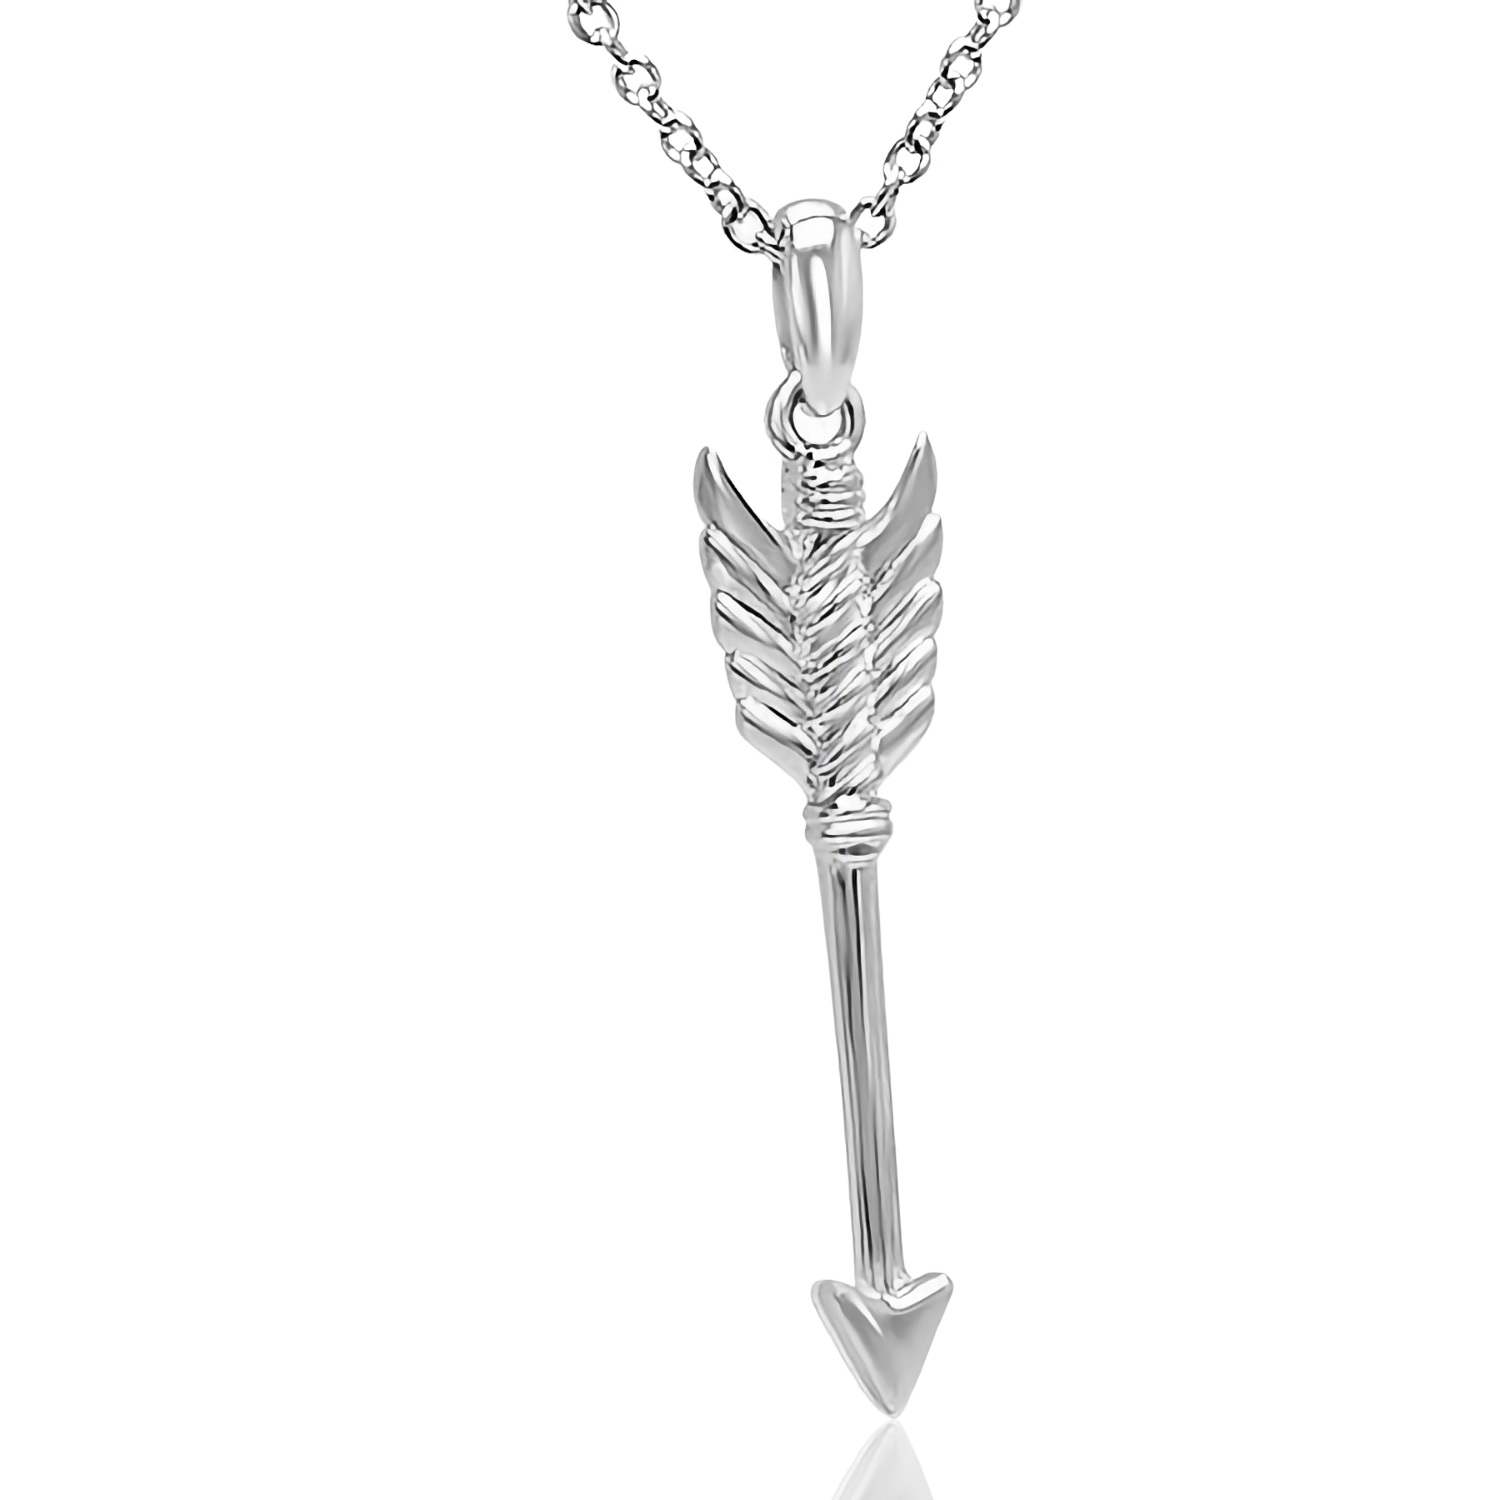 Celebrate the legendary skills of Legolas with the Official "The Hobbit" Legolas Arrow Pendant. Handcrafted by Middle Earth New Zealand, this piece of jewelry is a must-have for fans of the famous Lord of the Rings and The Hobbit Trilogy.